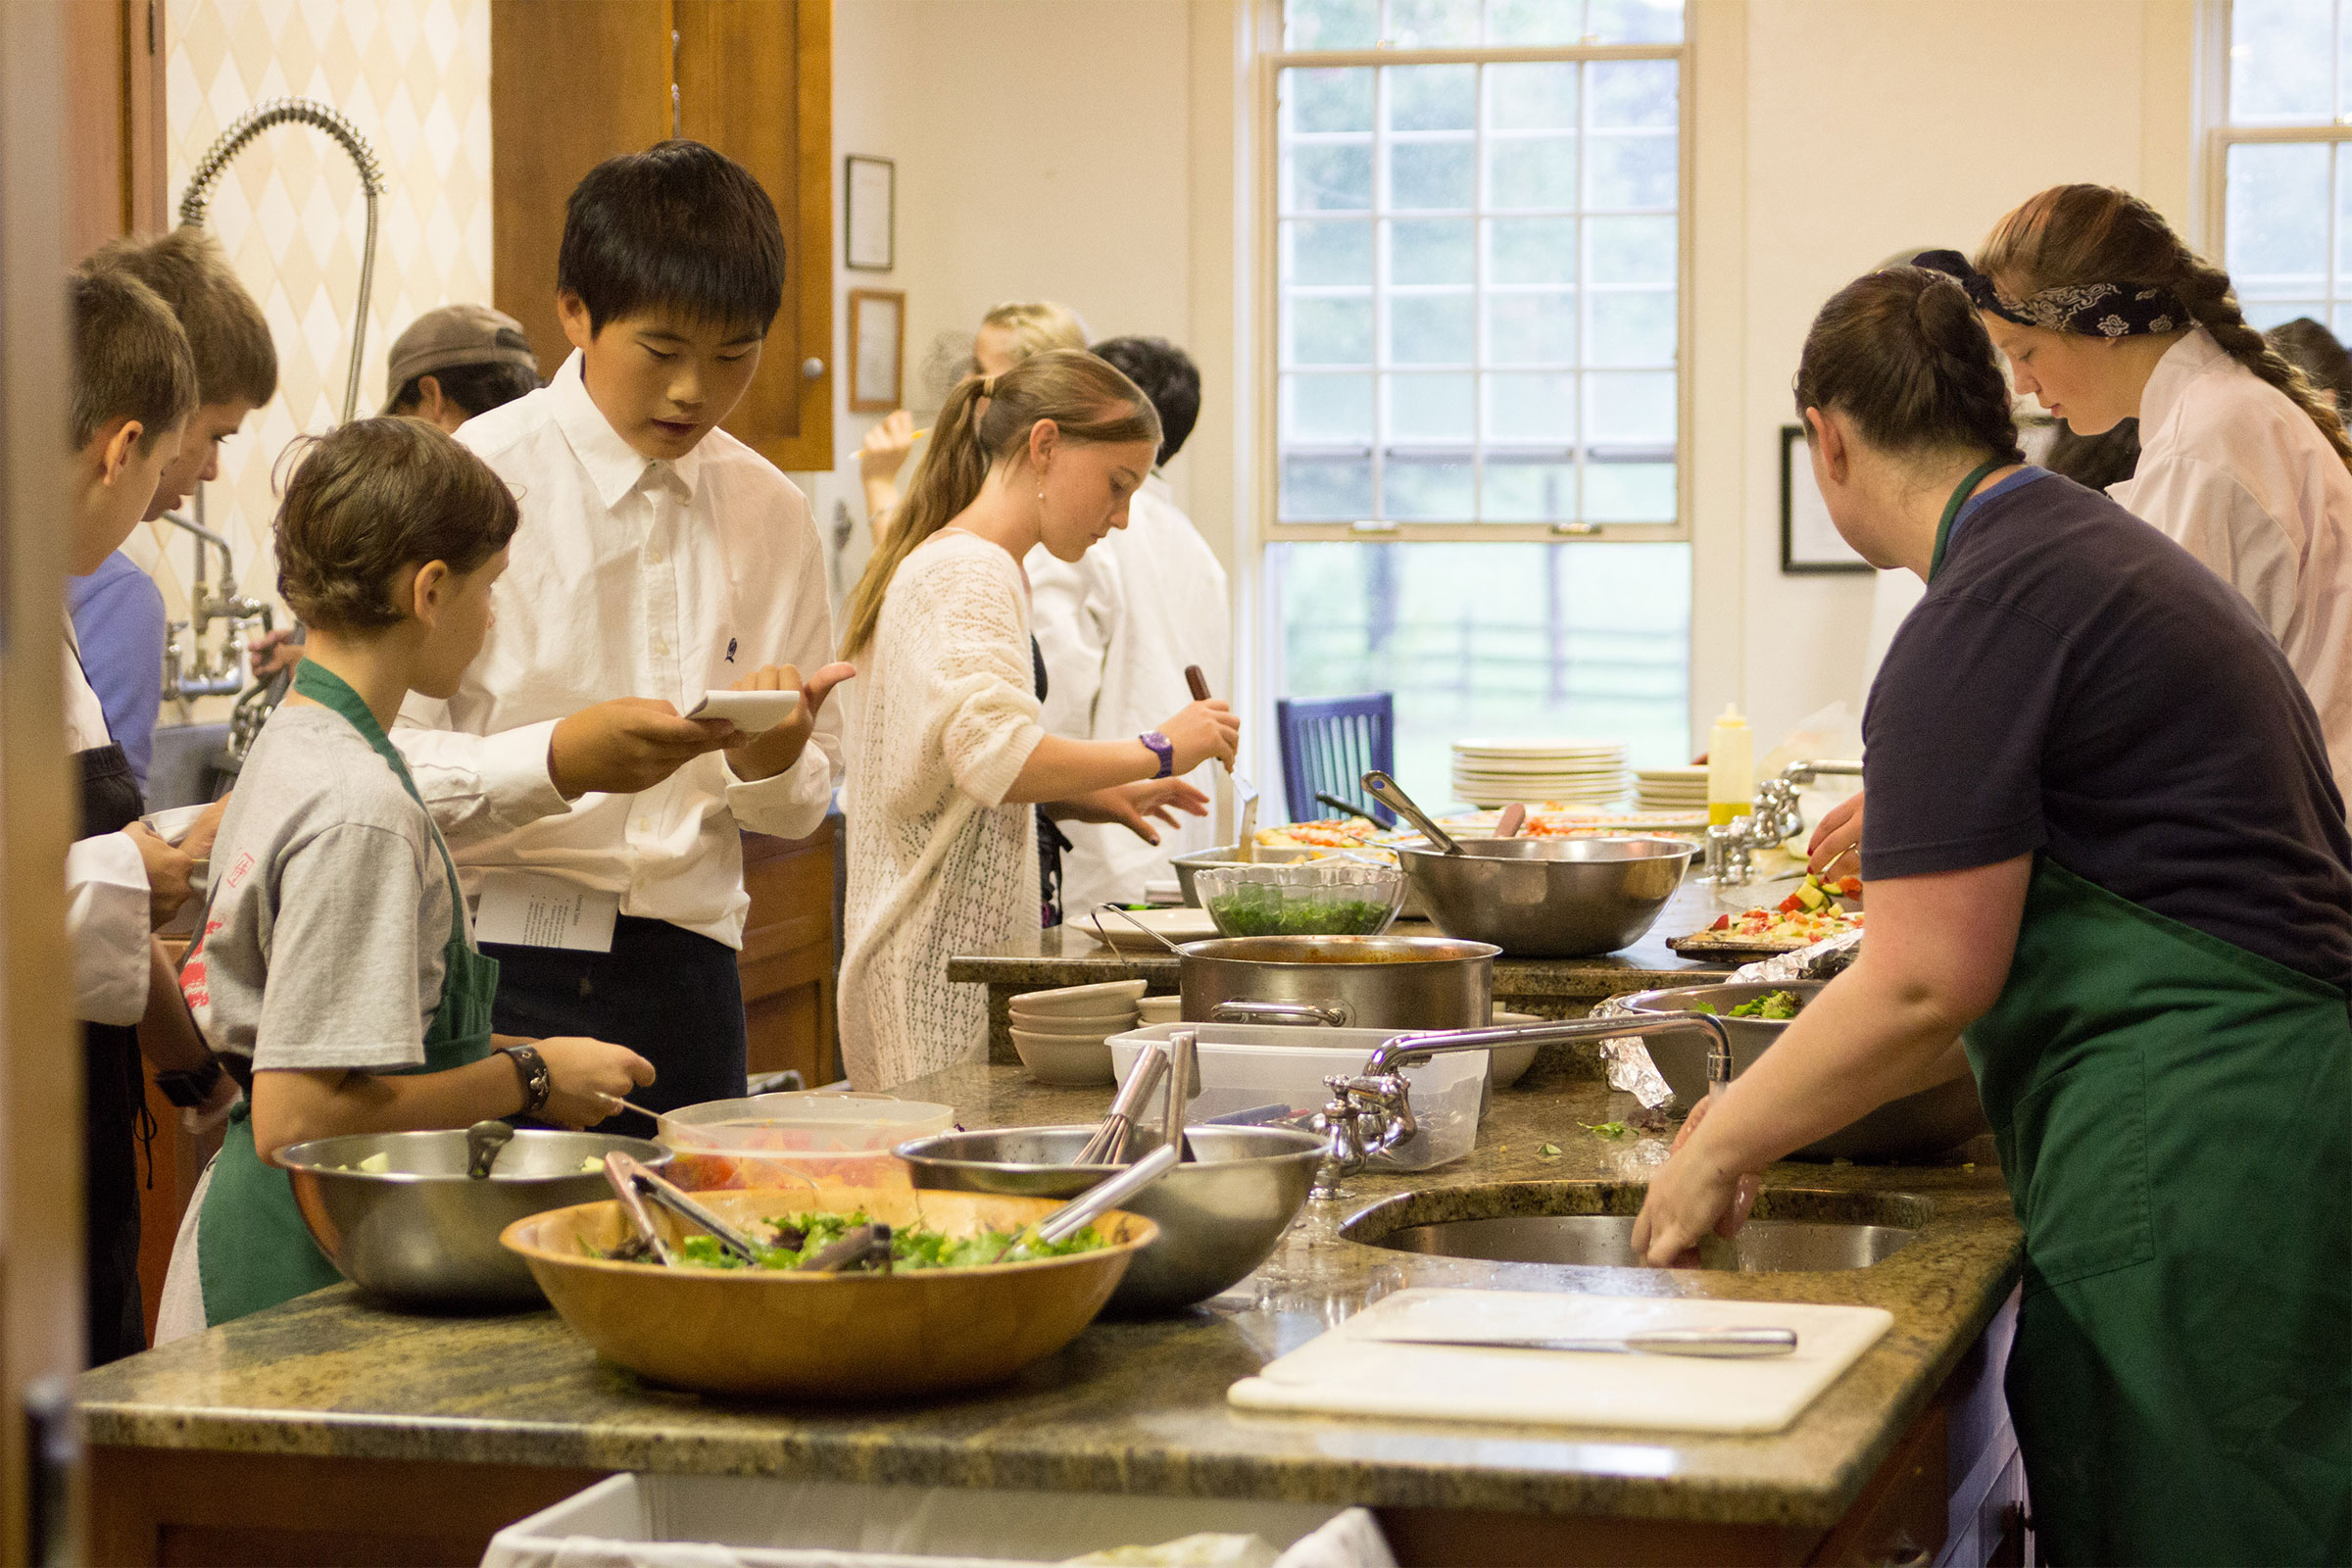 Adolescents working in a catering environment